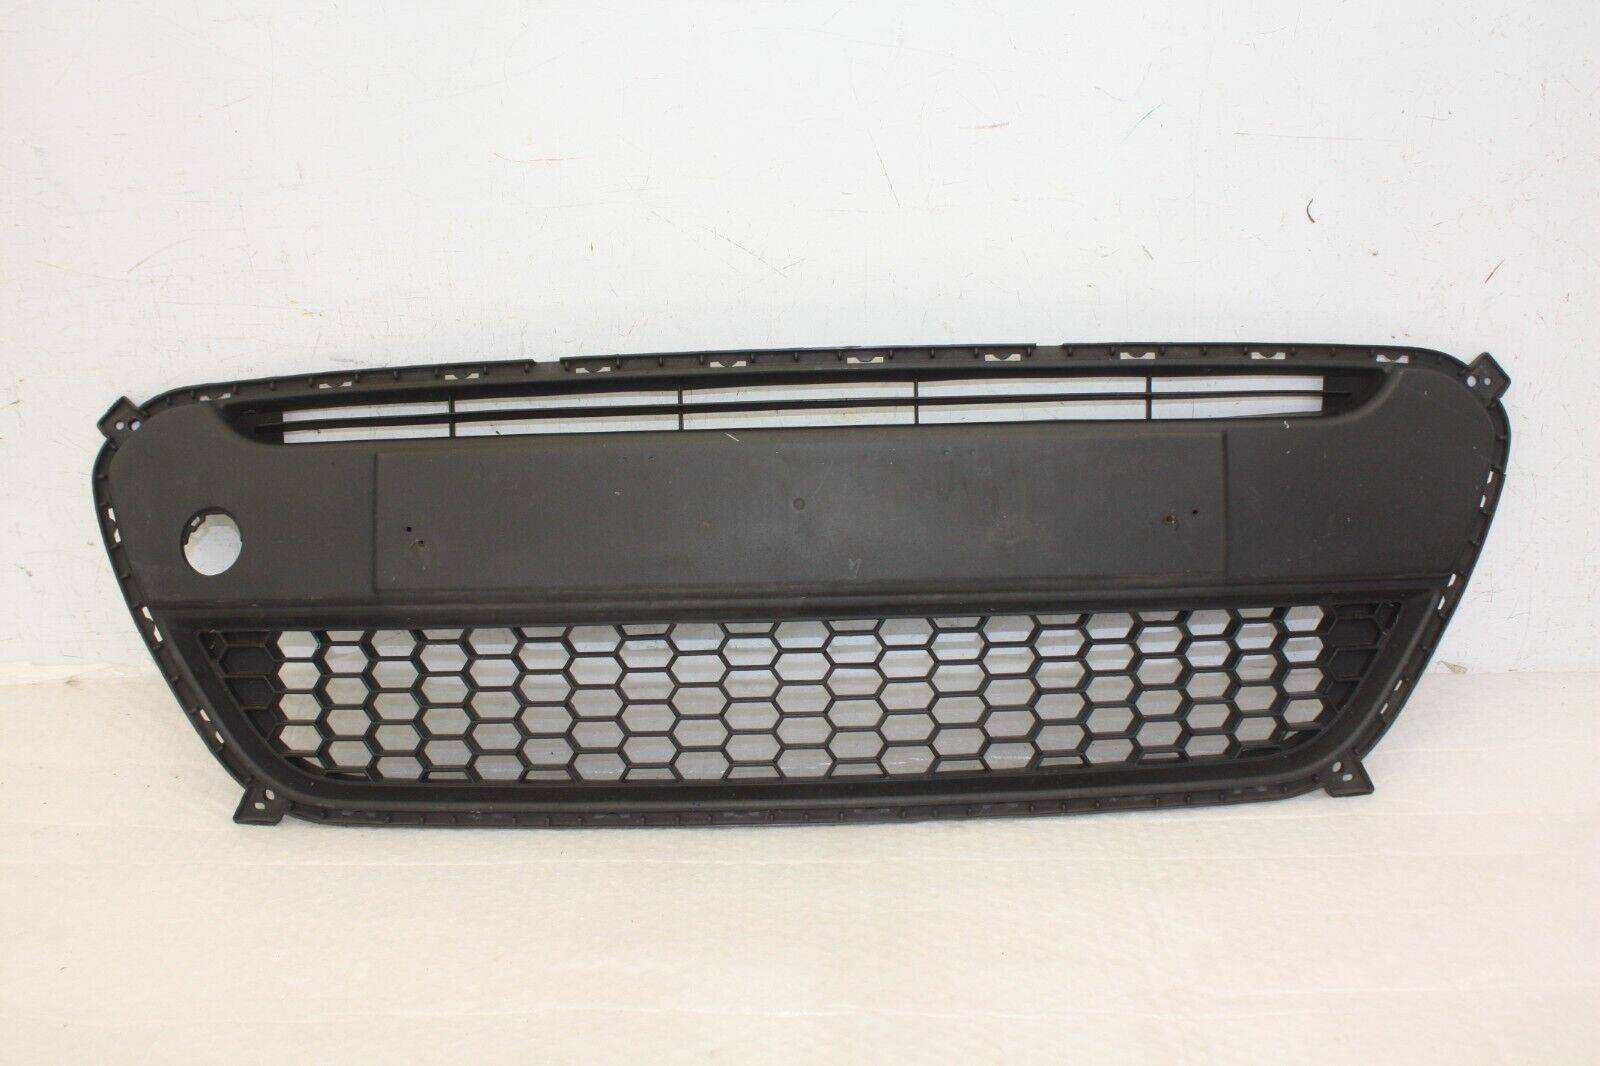 Kia-Picanto-Front-Bumper-Lower-Grill-2011-TO-2015-86569-1Y000-Genuine-DAMAGED-176319954983